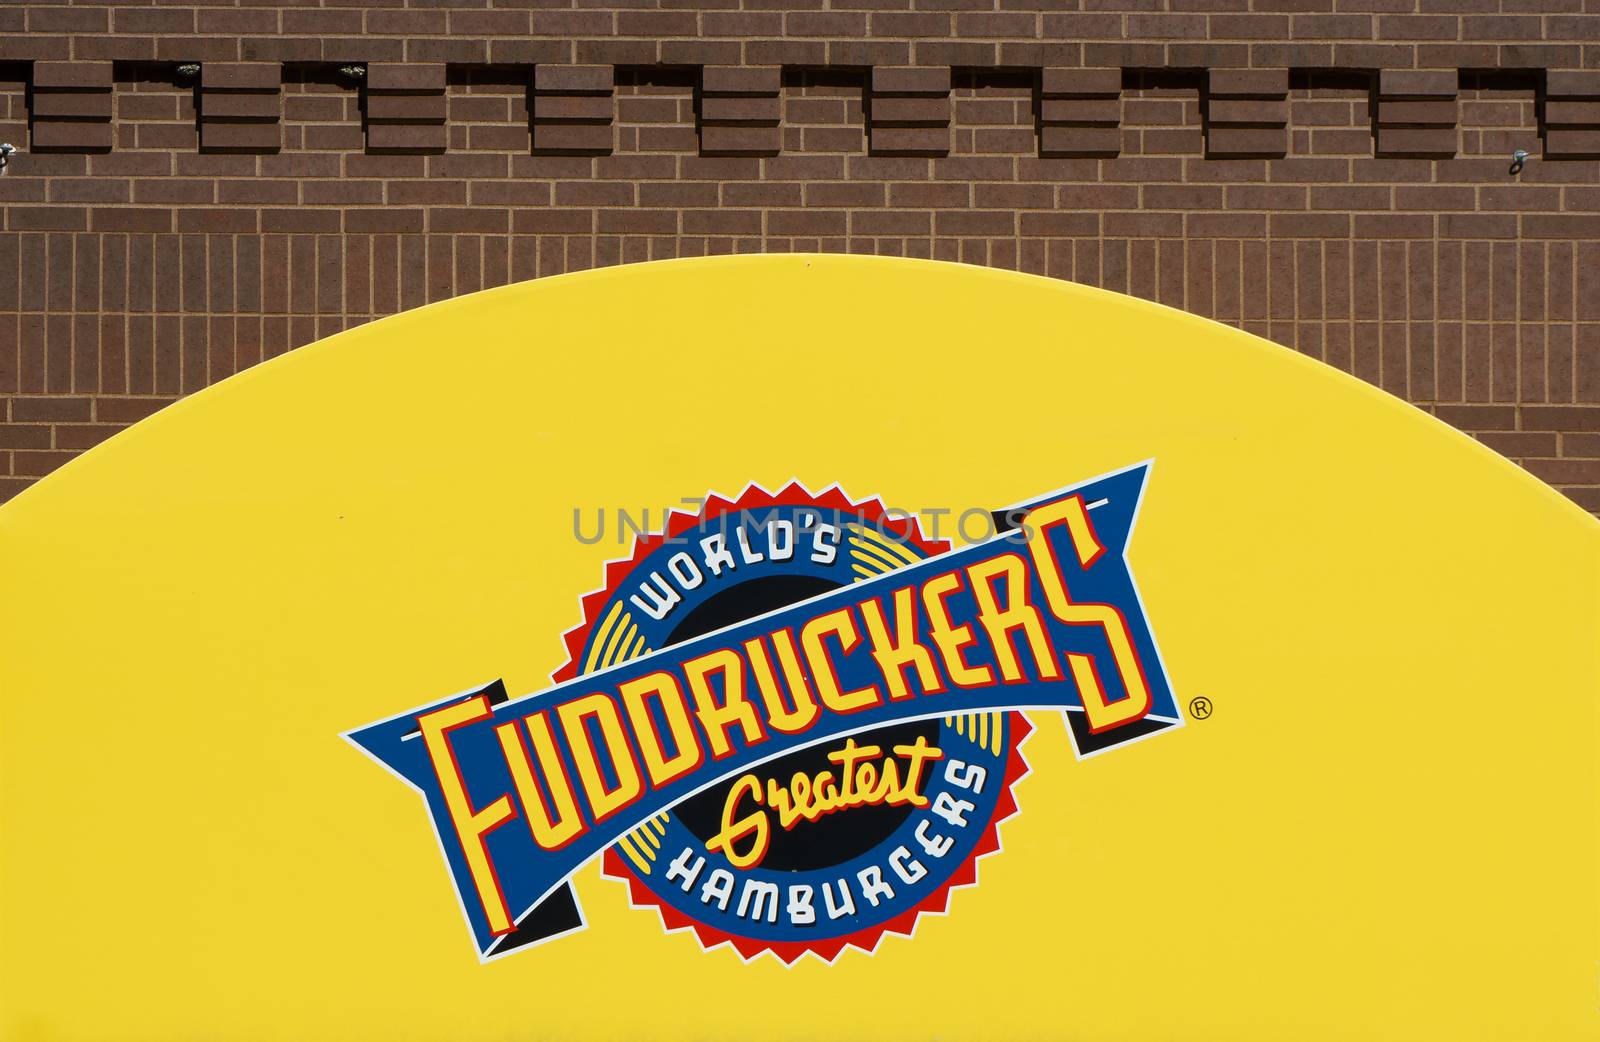 Fuddruckers Restaurant Exterior and Sign. by wolterk